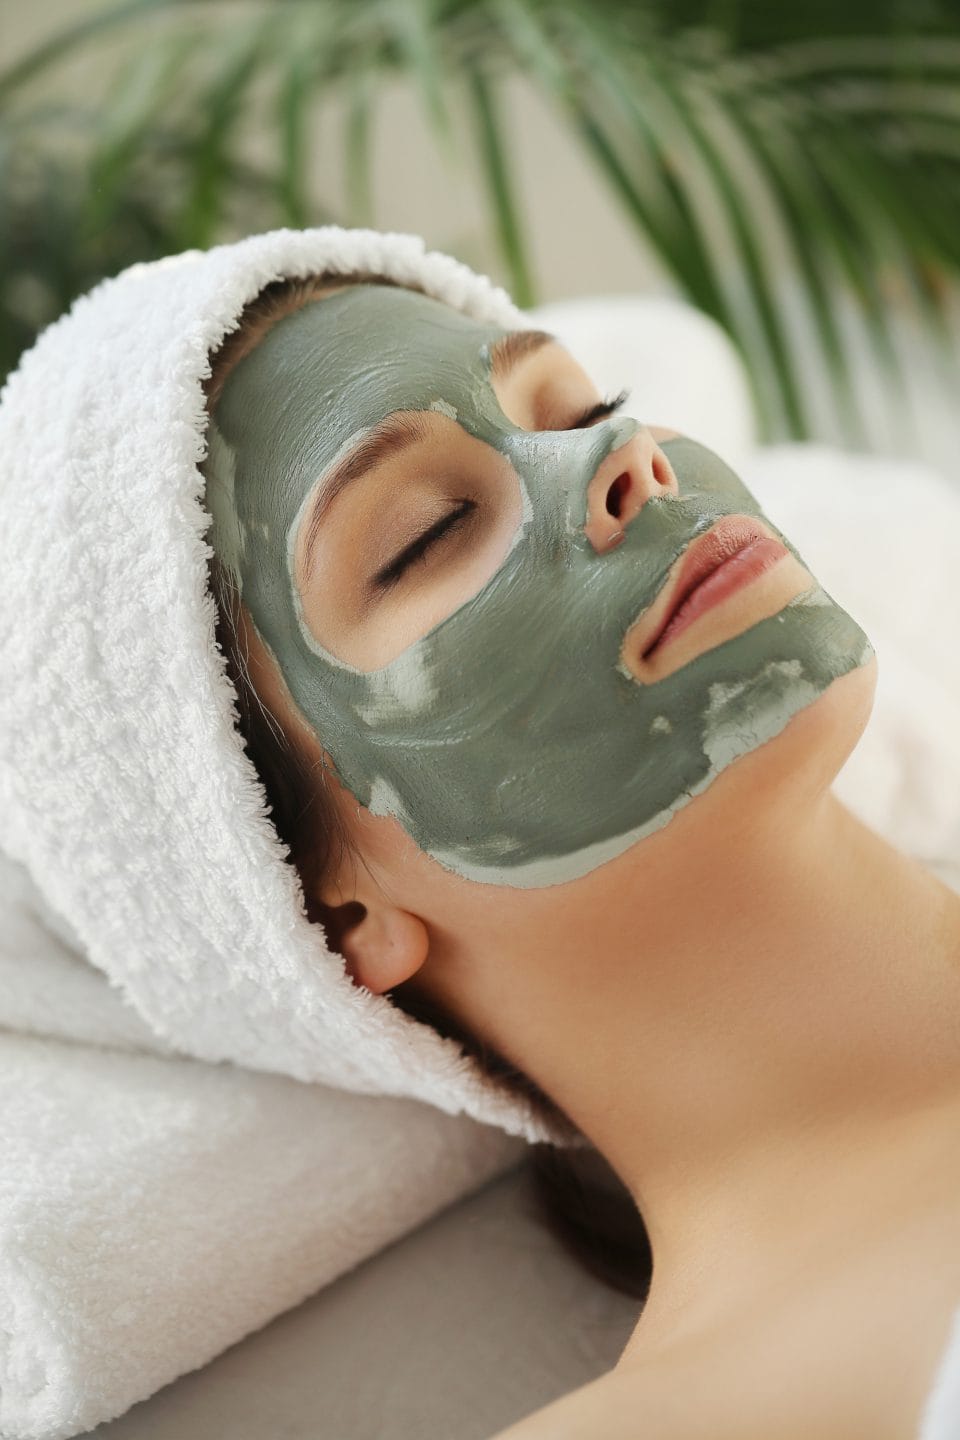 Facial Mud Mask Treatment Near Me in Denver at Zen'd Out Massage Spa